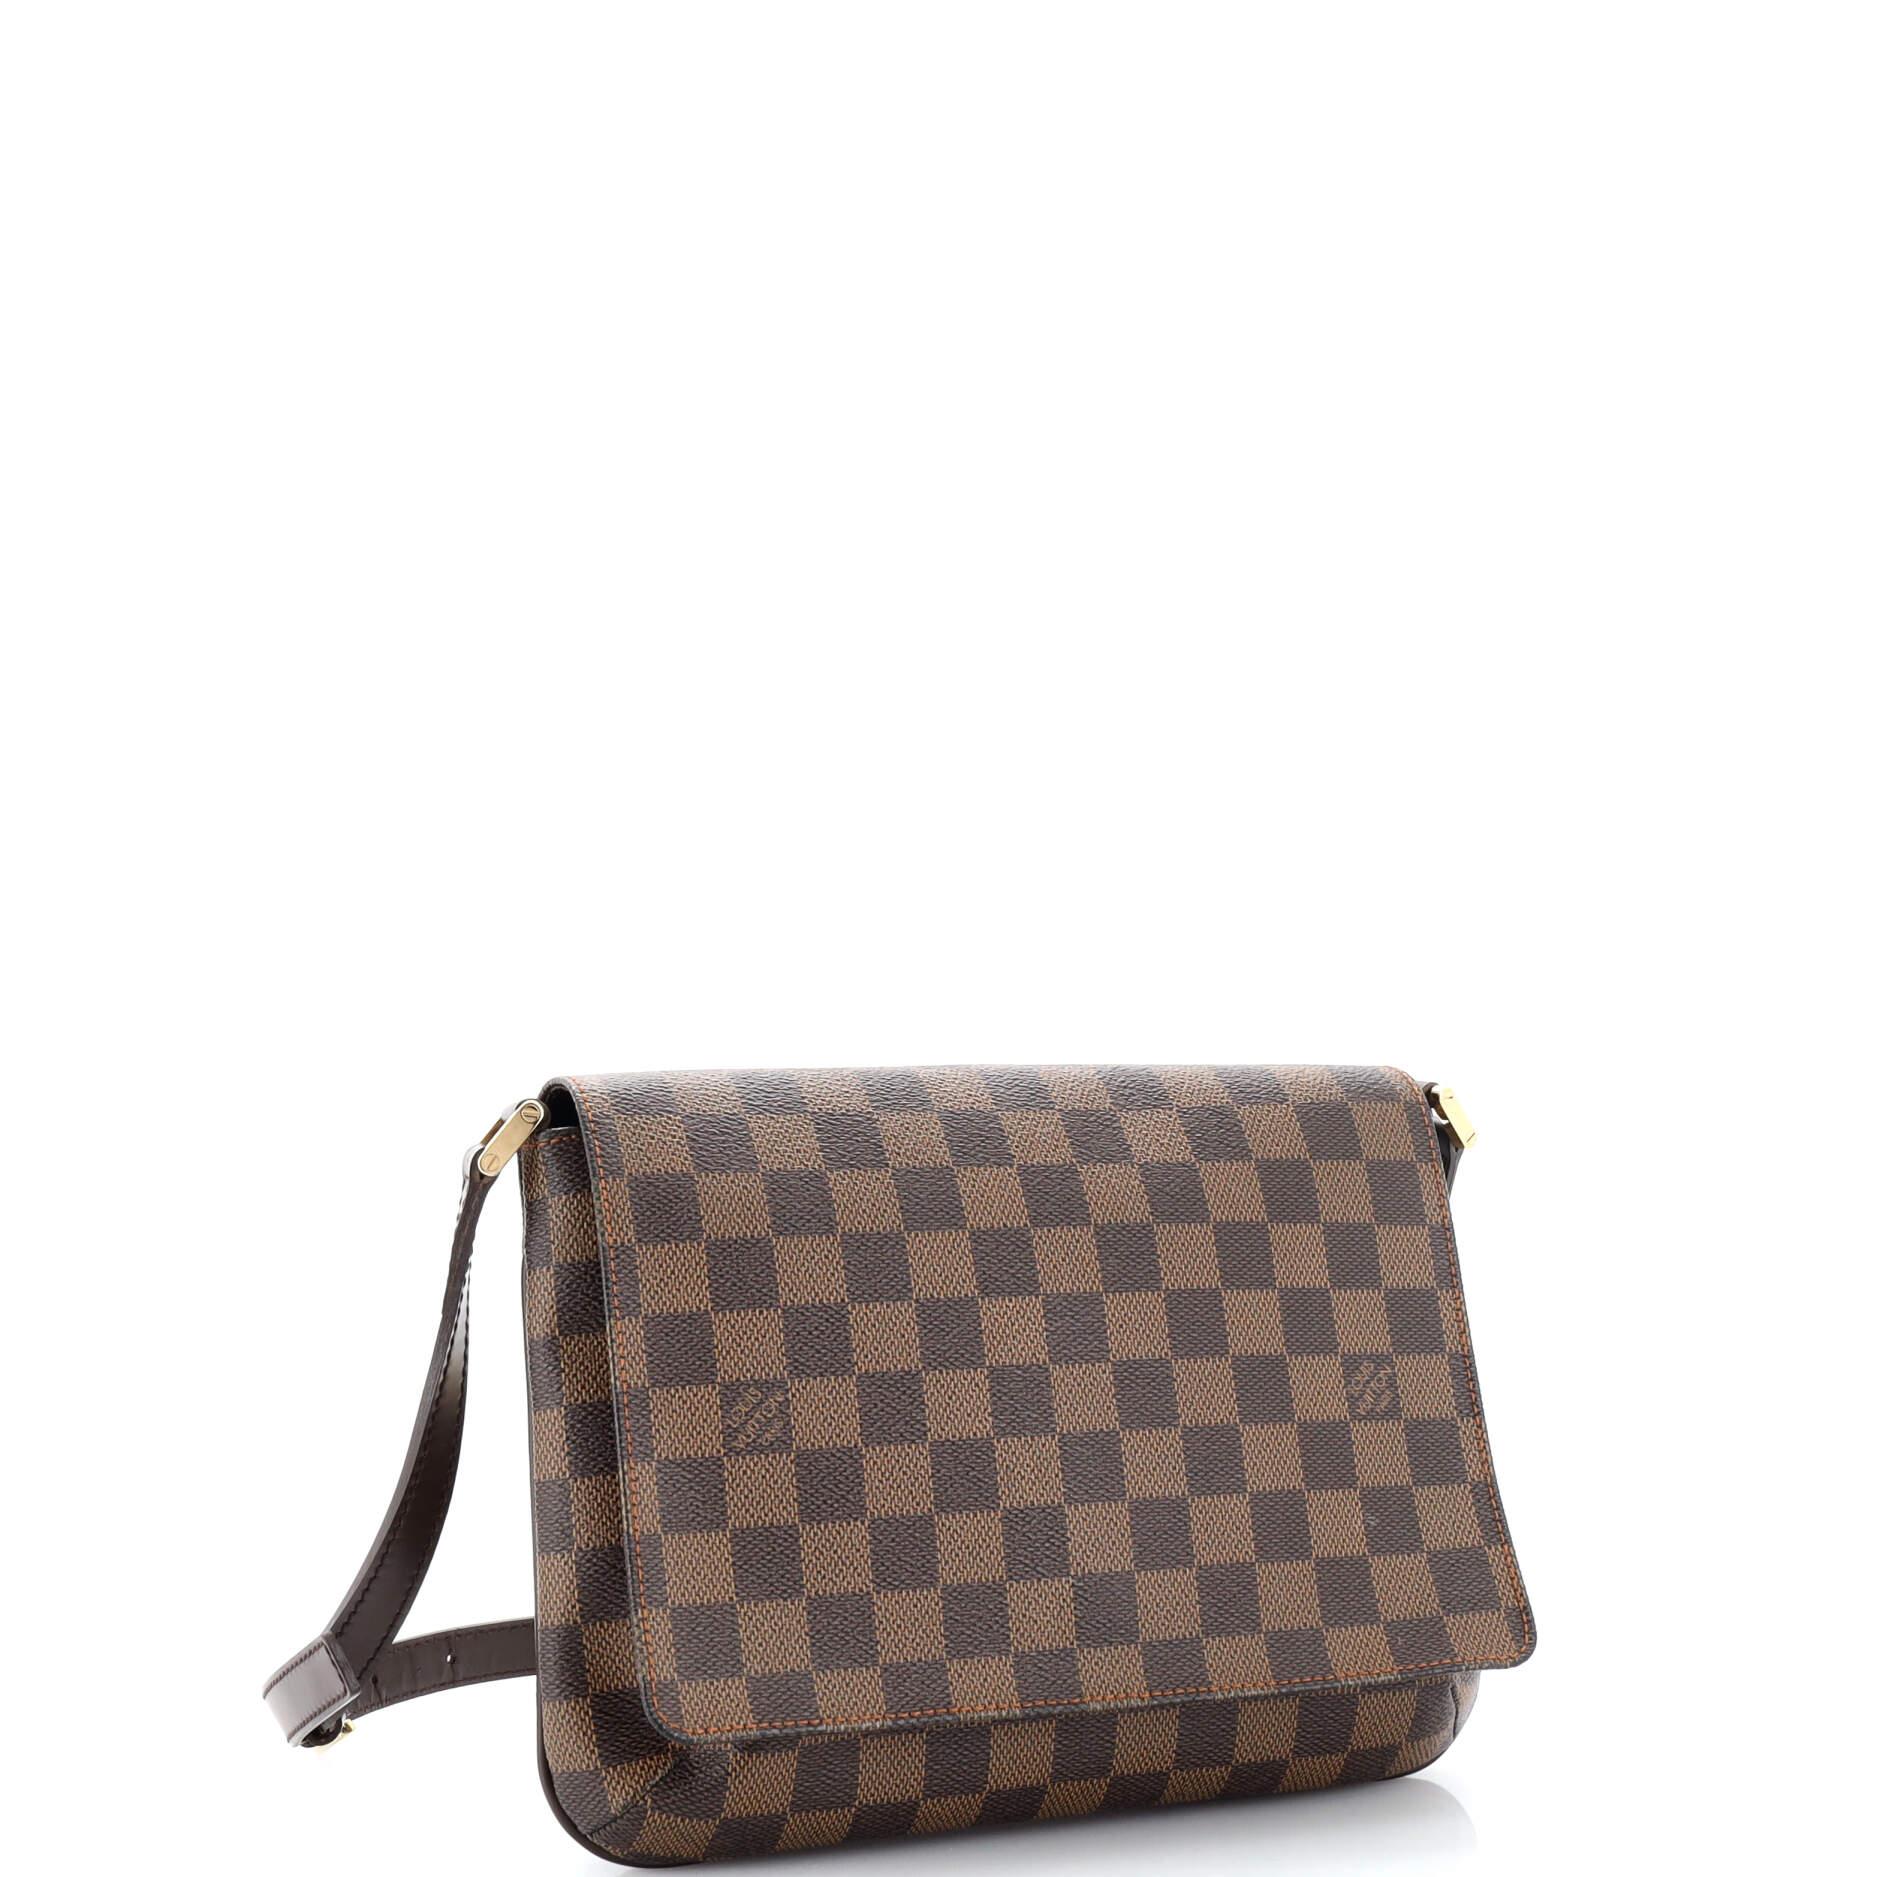 Louis Vuitton Musette Tango - For Sale on 1stDibs